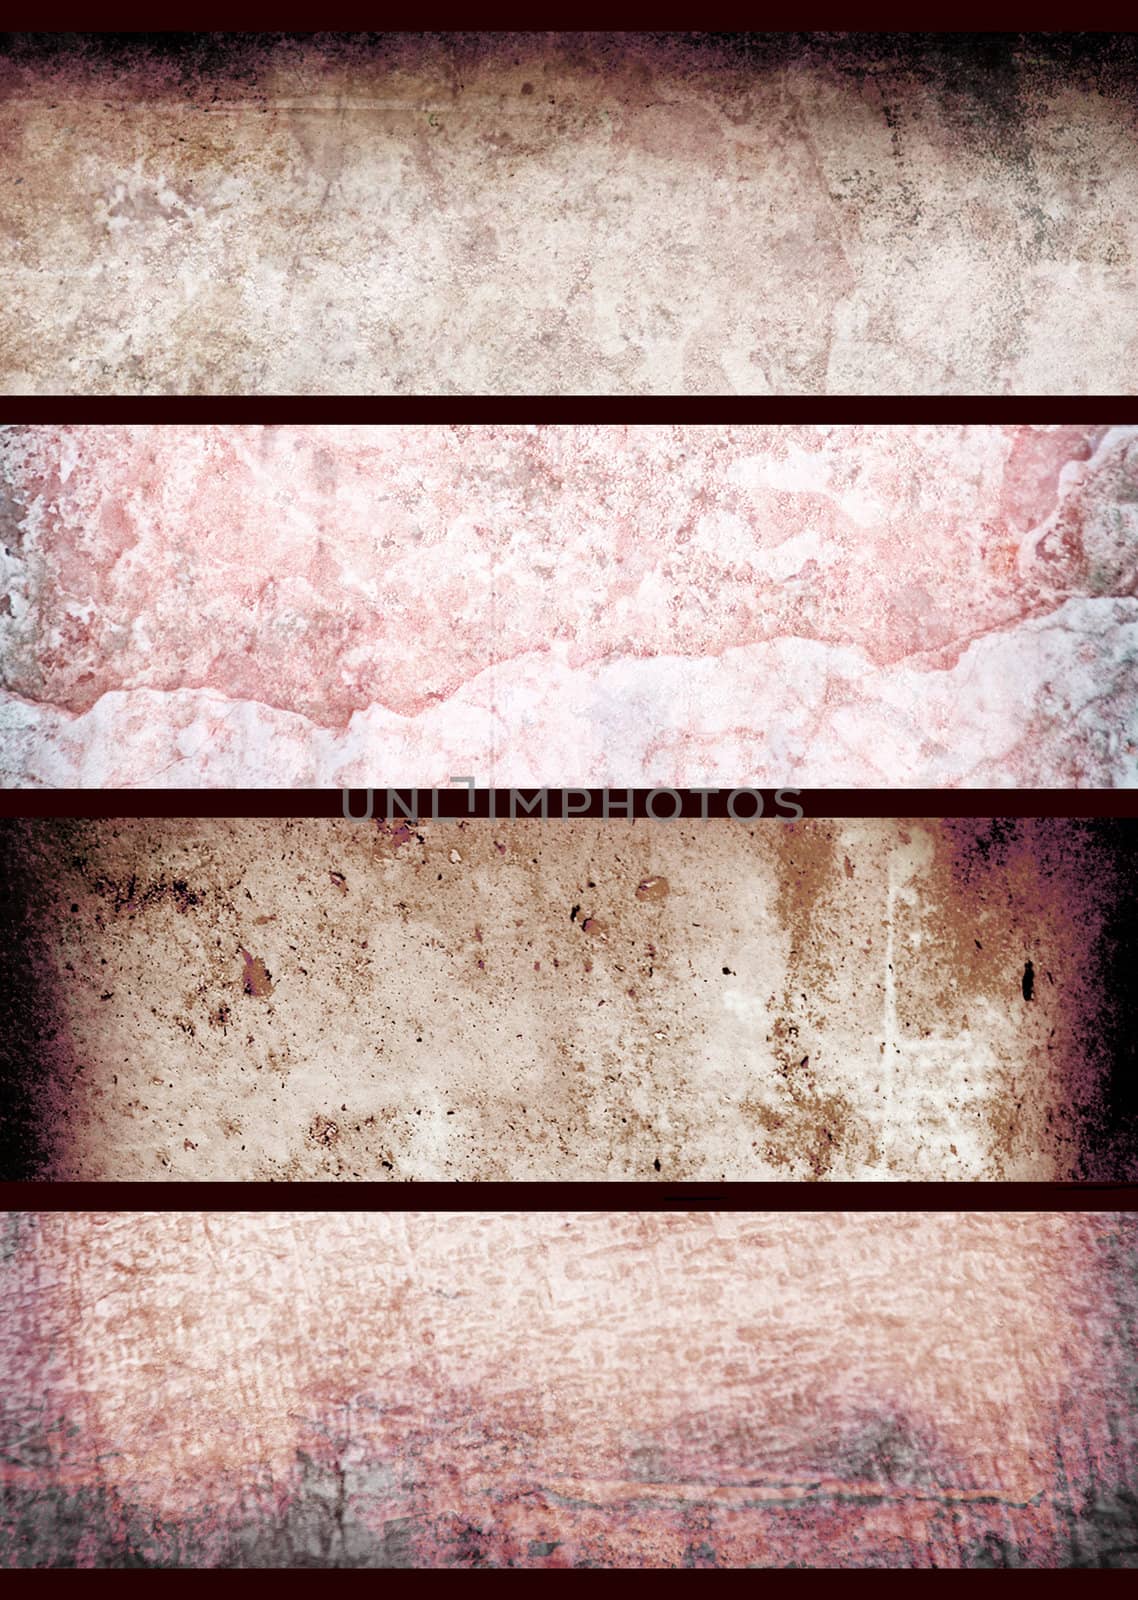 grunge background image with a red hue